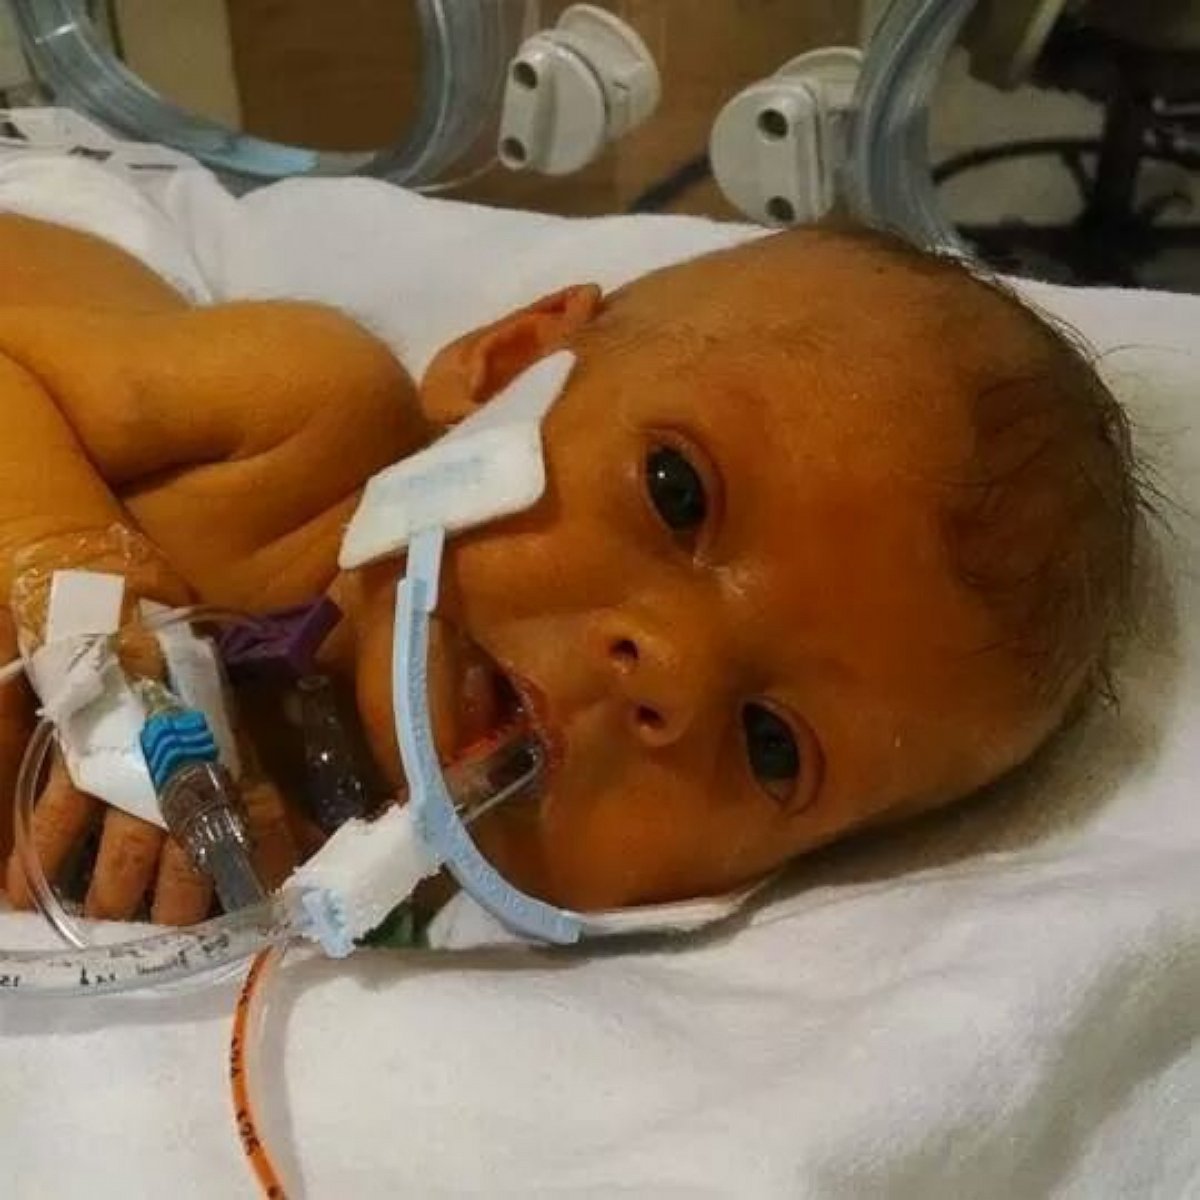 PHOTO: Nathan Steffel reached out to Reddit for help removing the tubes from a photo of his daughter.